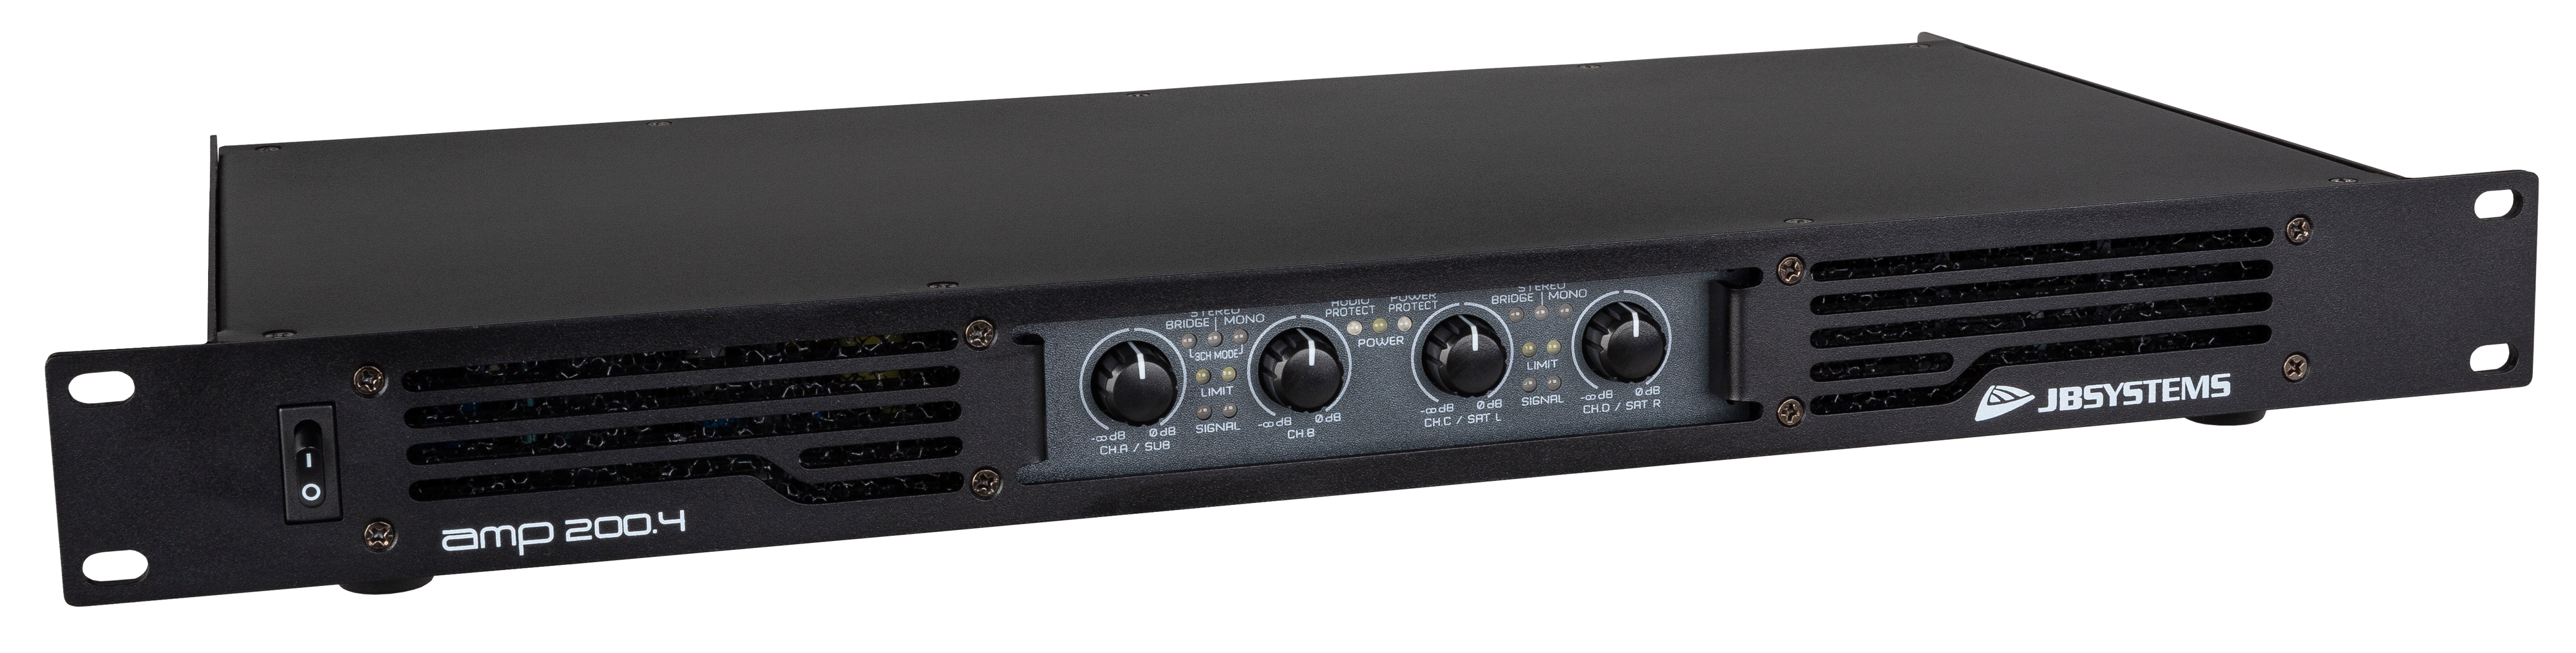 Professional 4-channel power amplifier in an extremely compact 19" 1U-housing